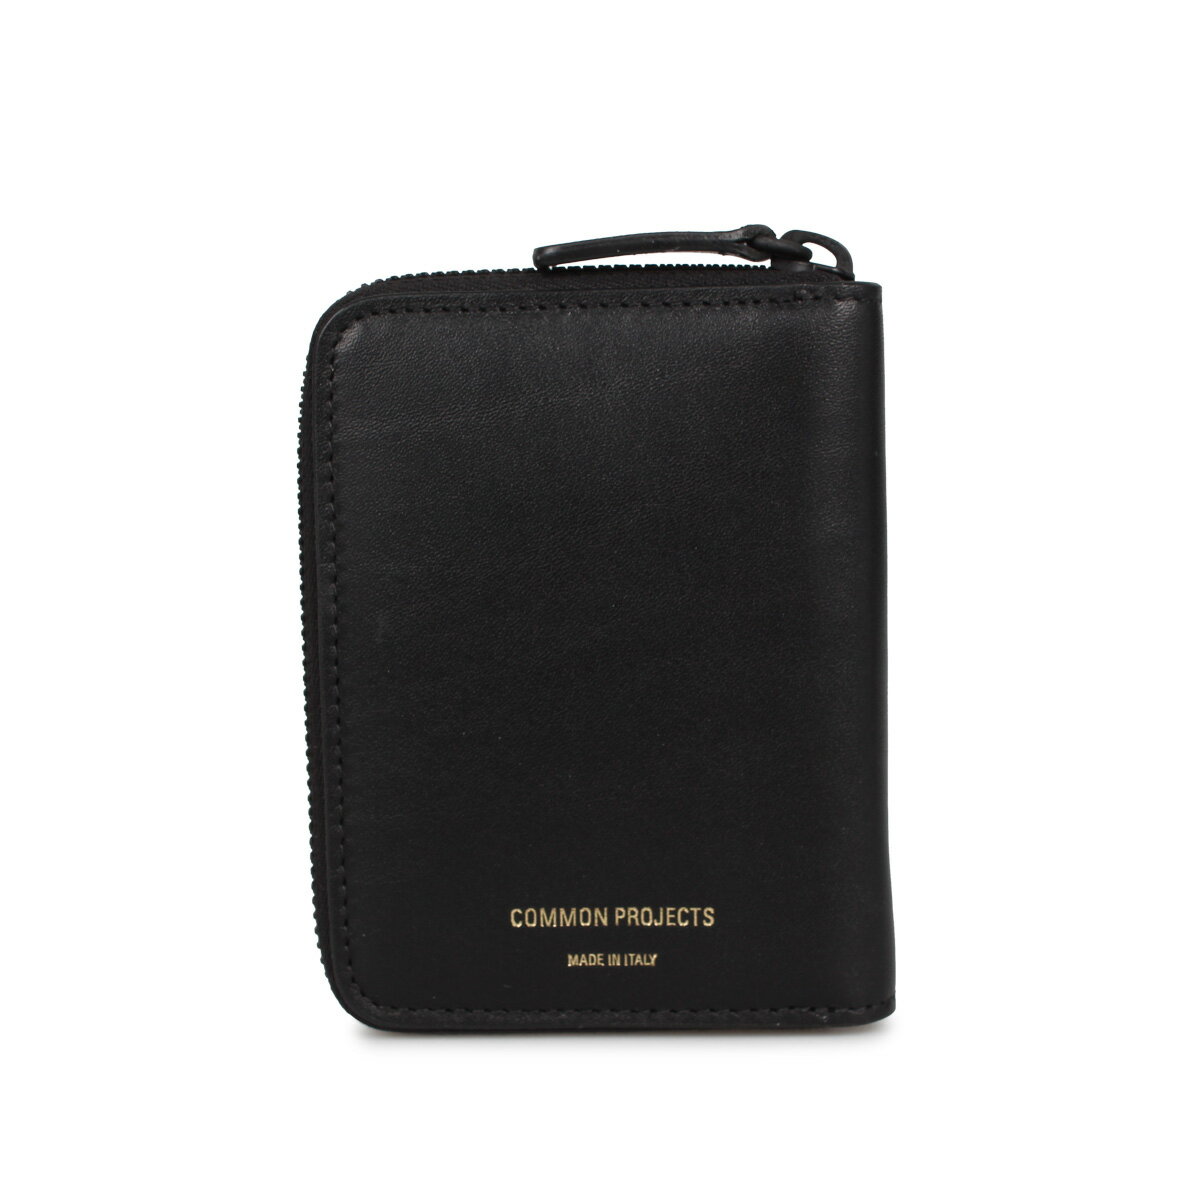 Common Projects ZIP COIN CASE コモンプロジェクト 財布 小銭入れ コイ ...